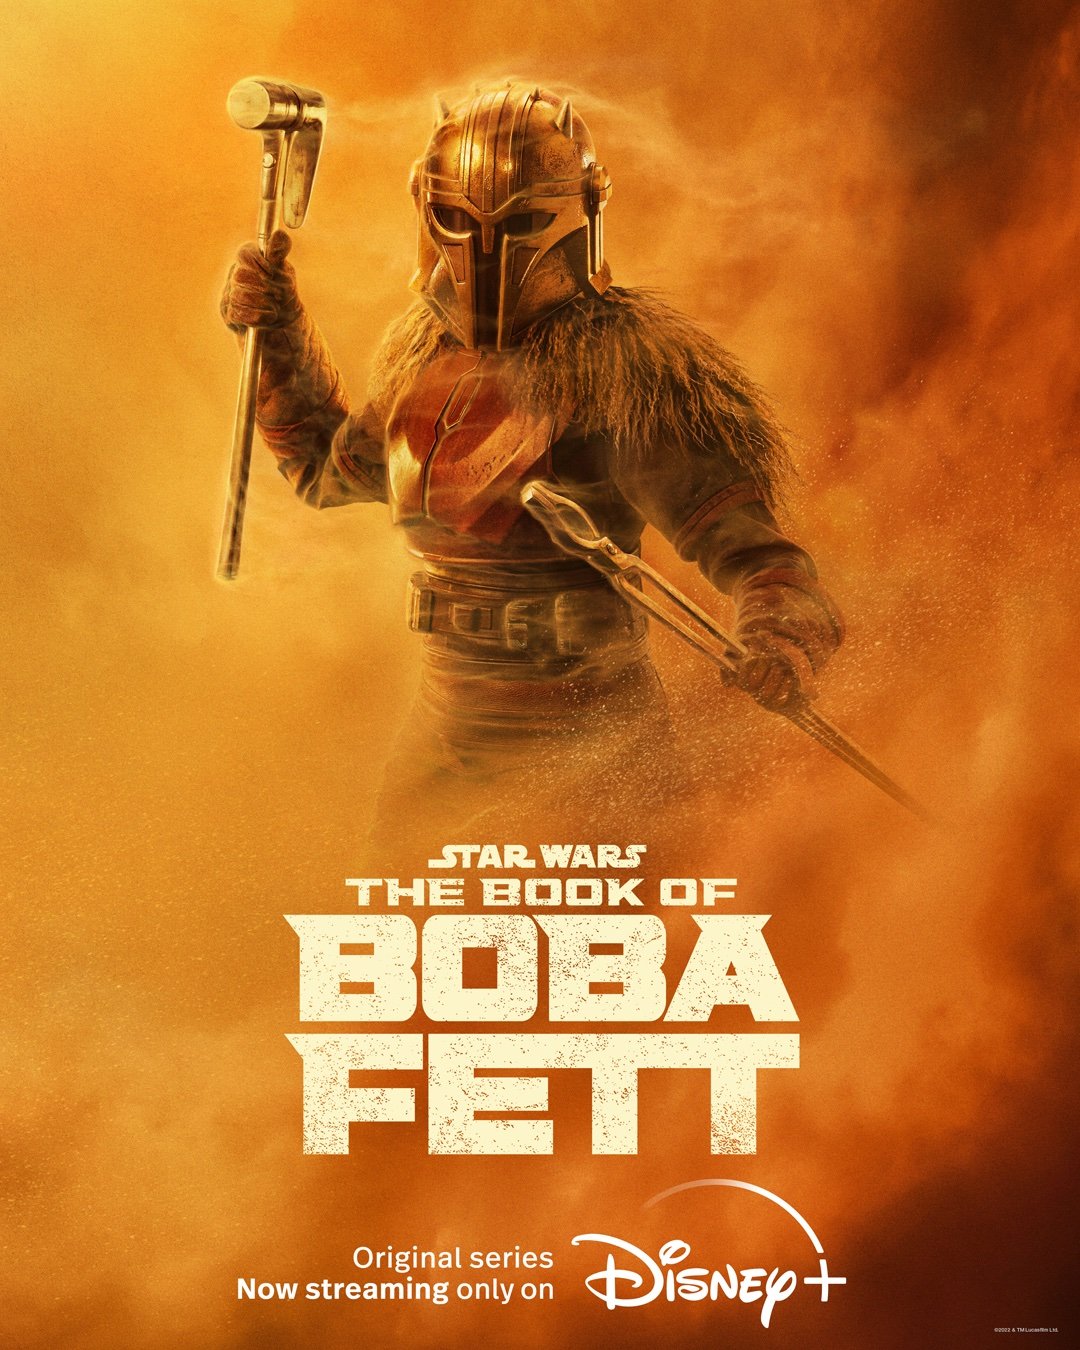 Fett\' Star Posters 5 The the the Book Chapter Boba of Feature of - Character Net Wars News Return Mandalorian